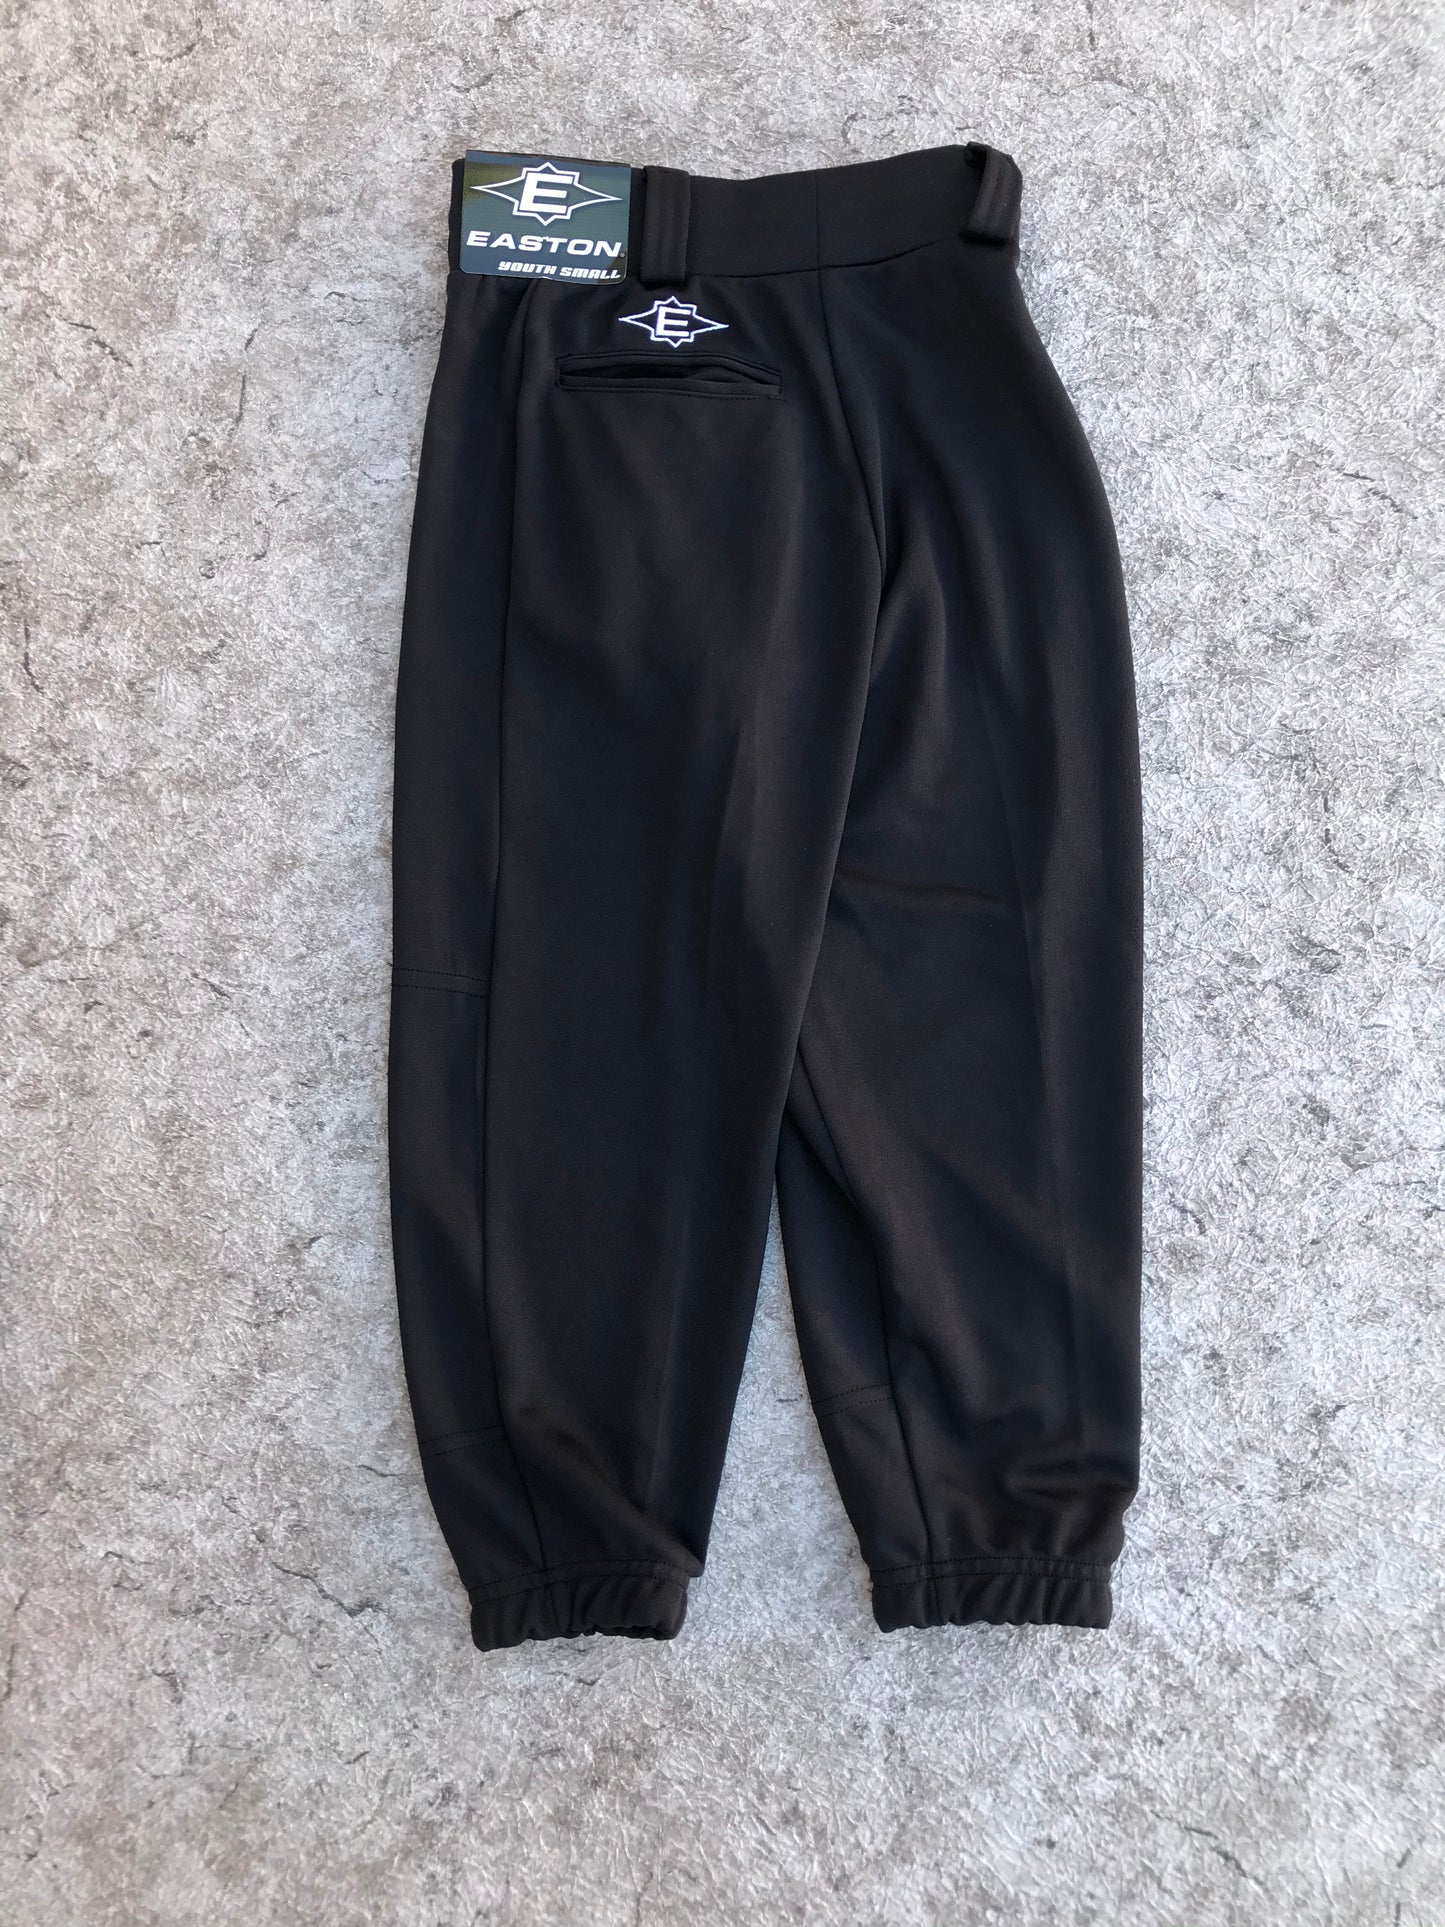 Baseball Pants Child Size Y Small 8-10 Easton Black NEW WITH TAGS